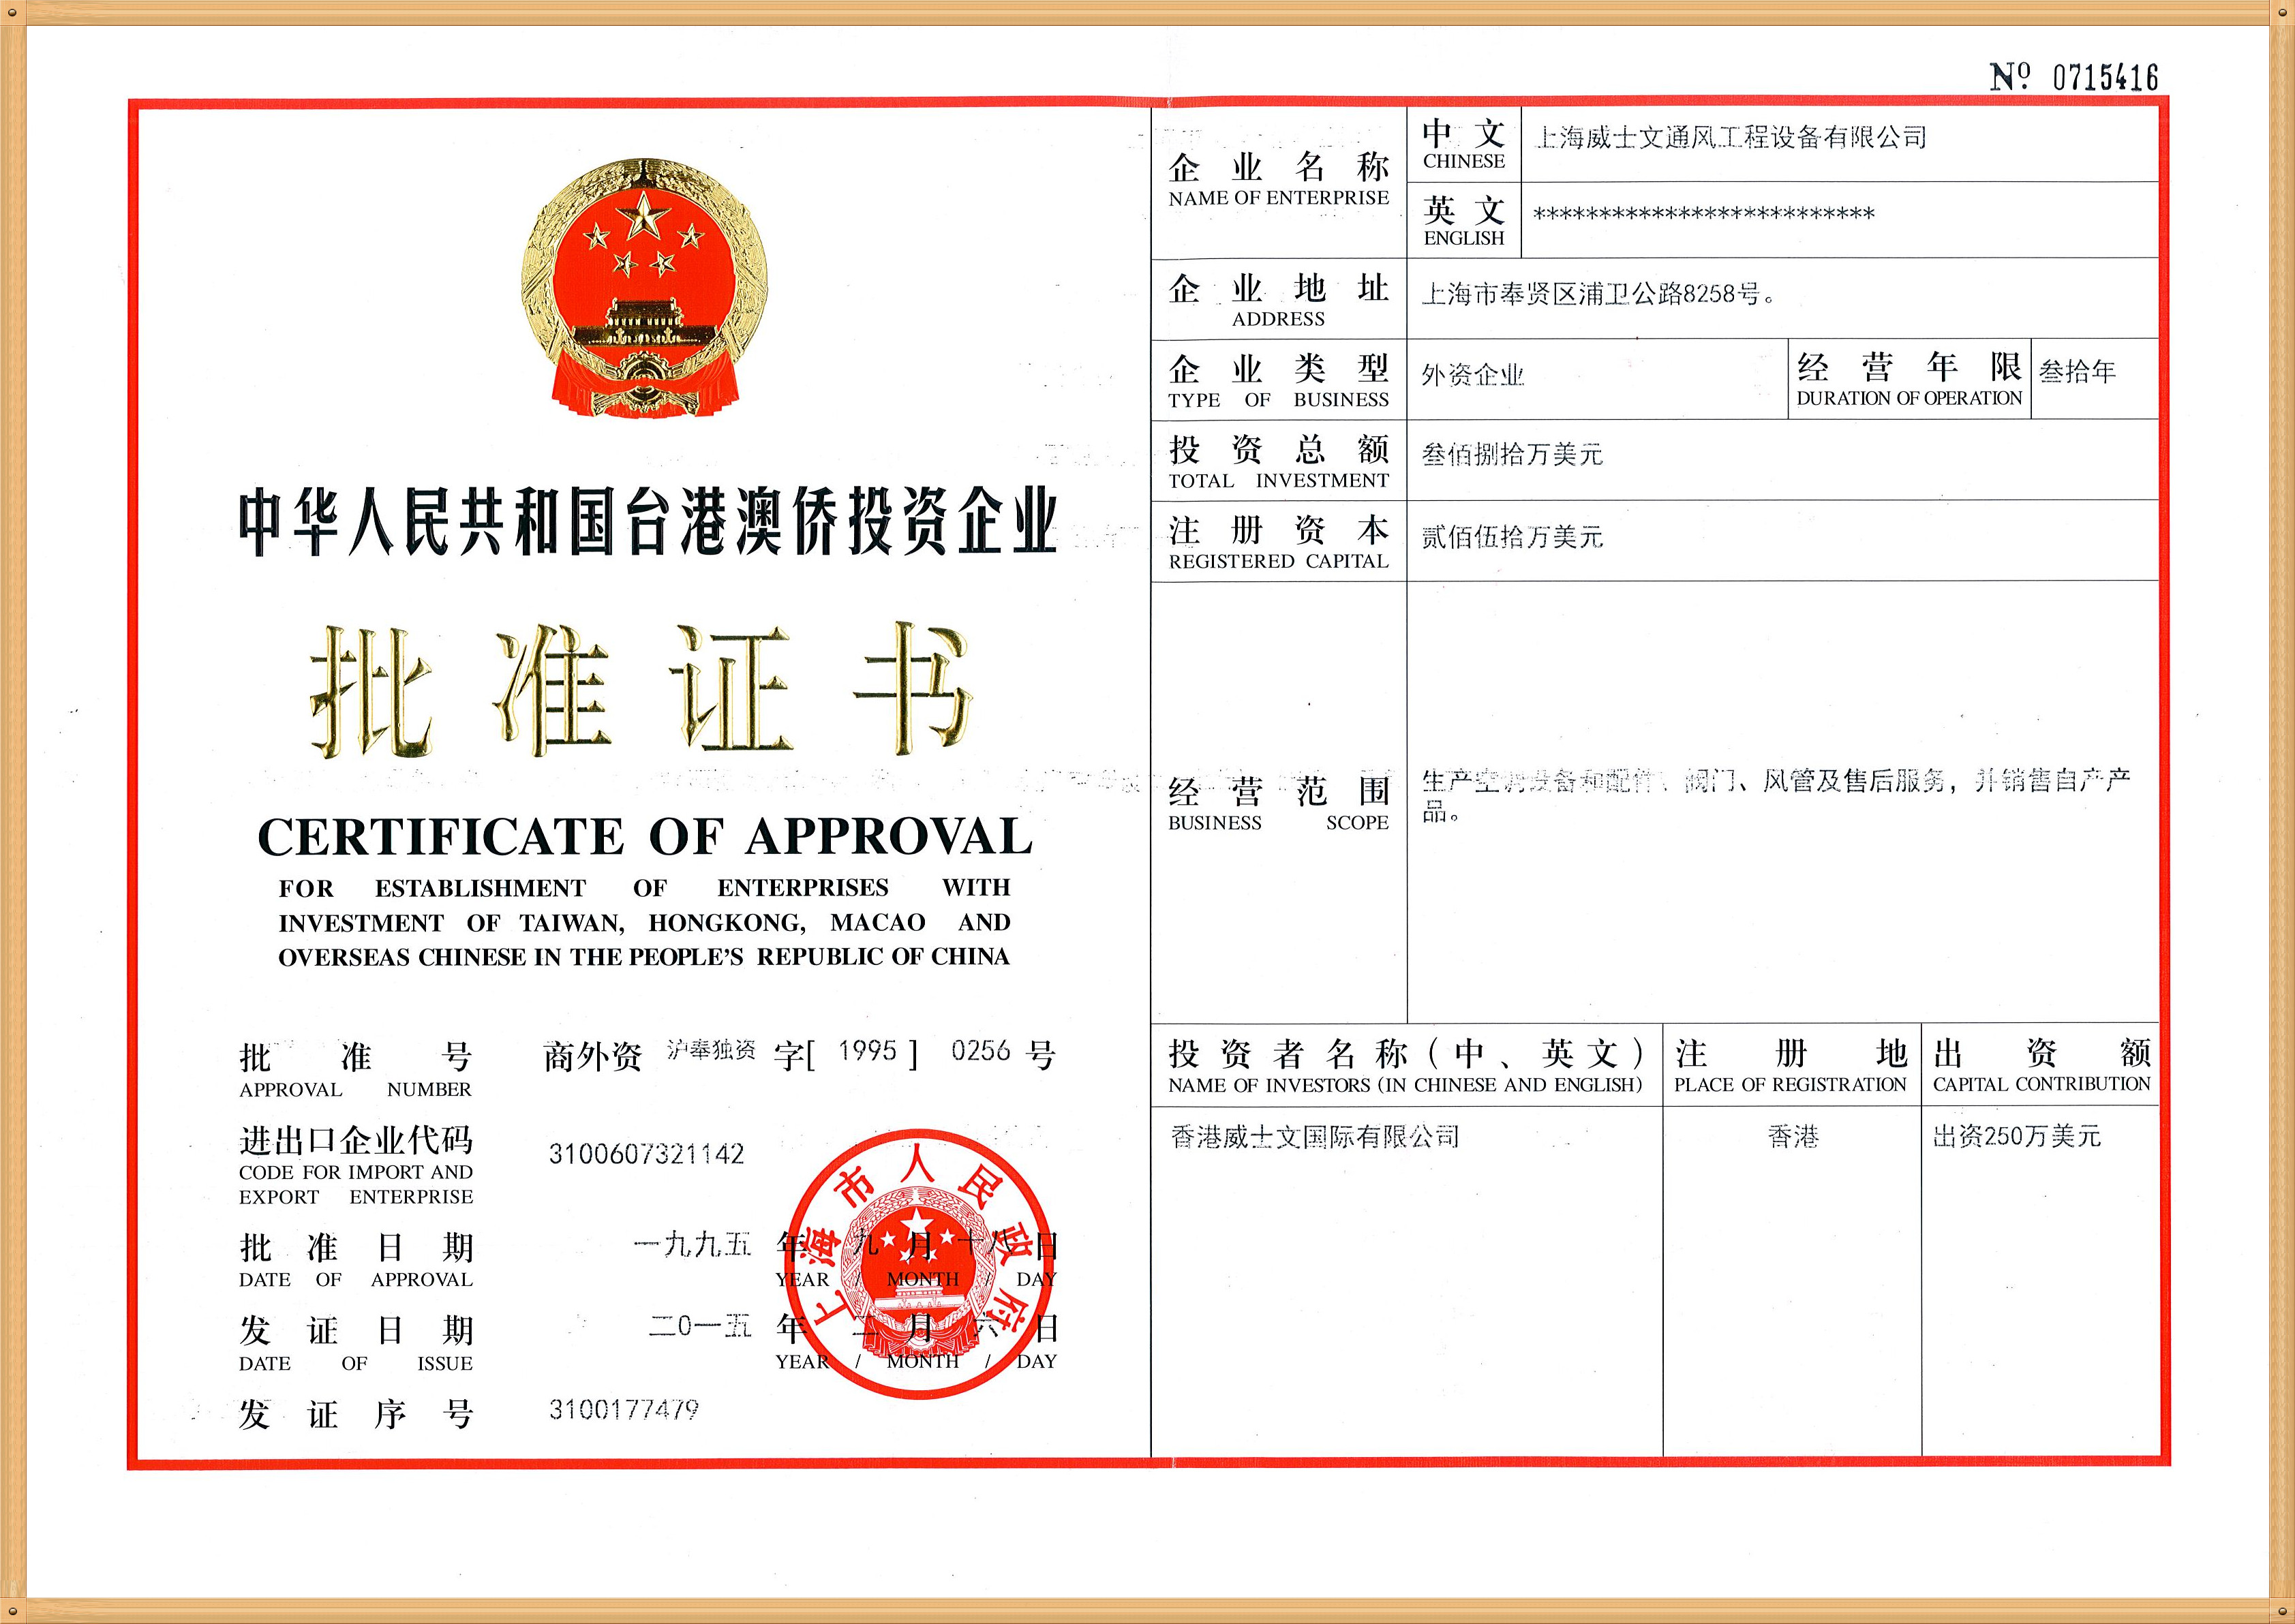 Approval certificate of Hong Kong, Macao and Taiwan